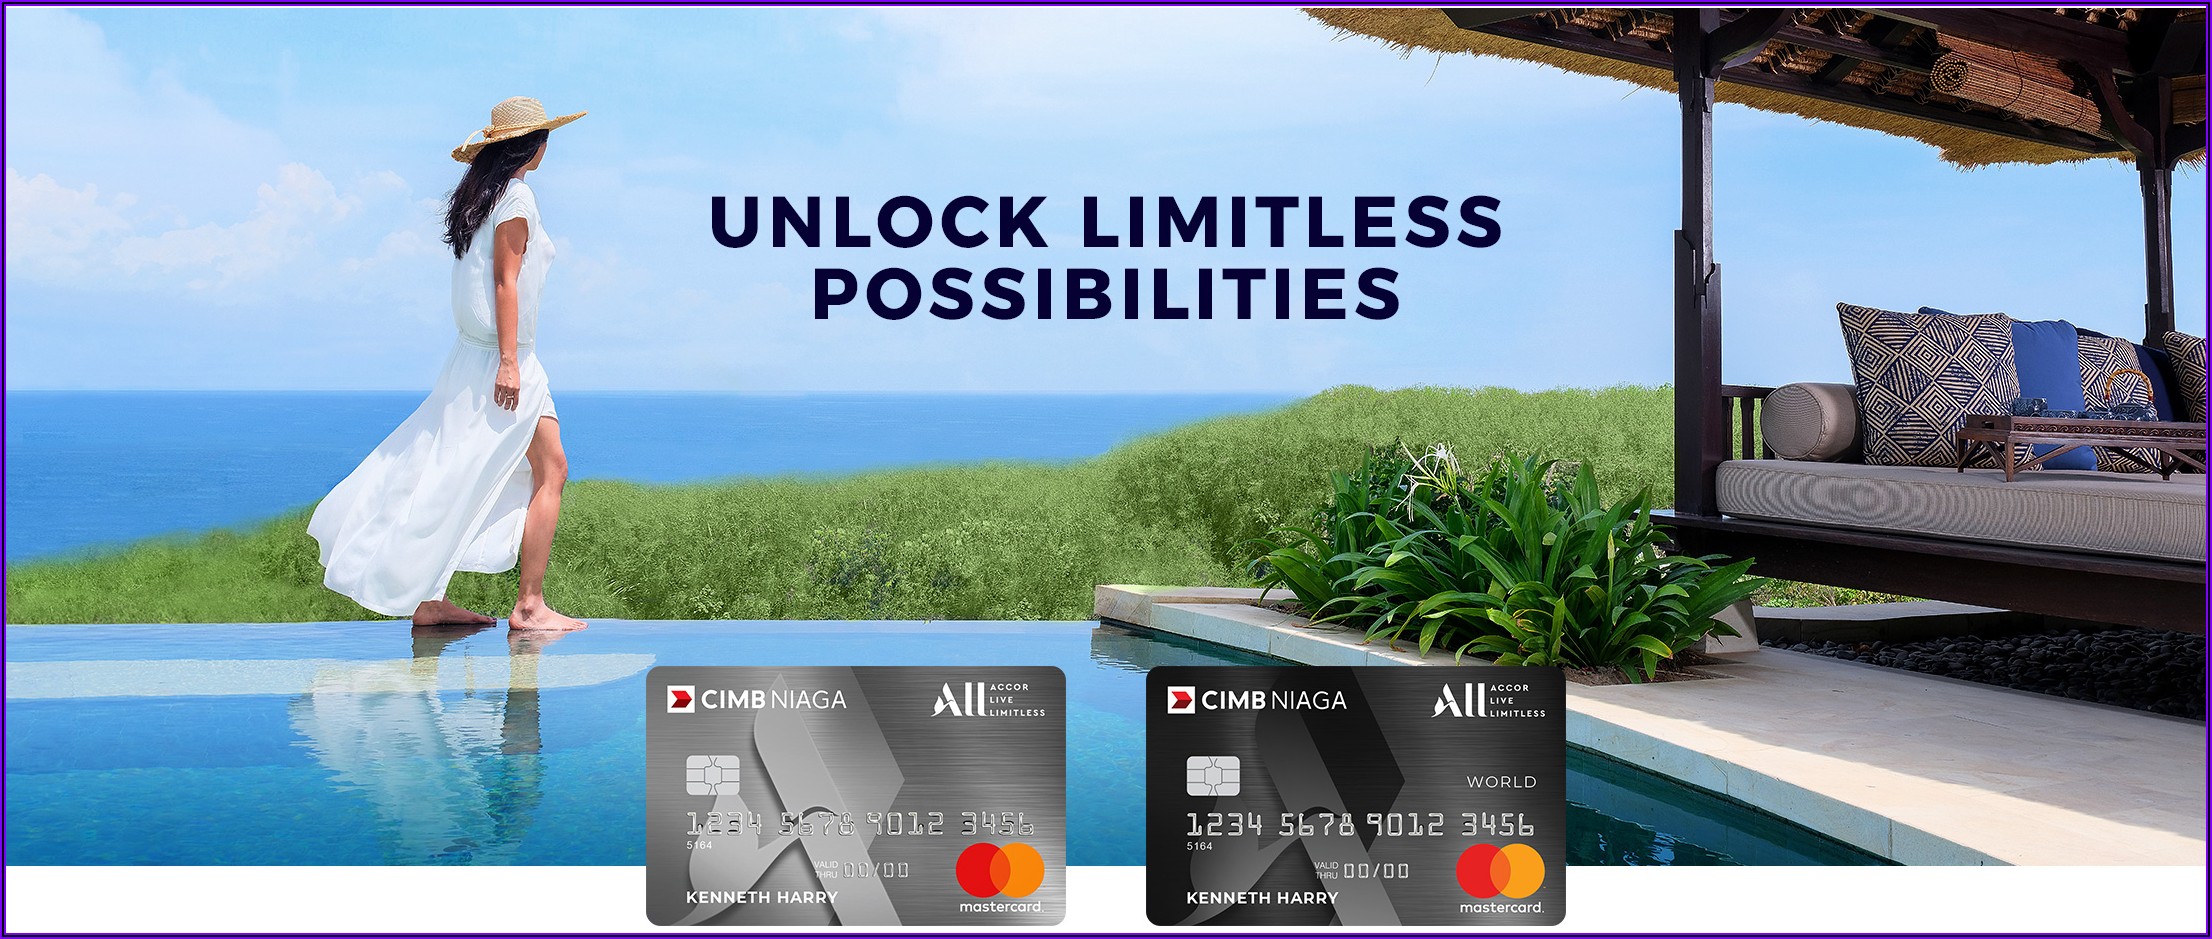 Accor Business Plus Card Benefits